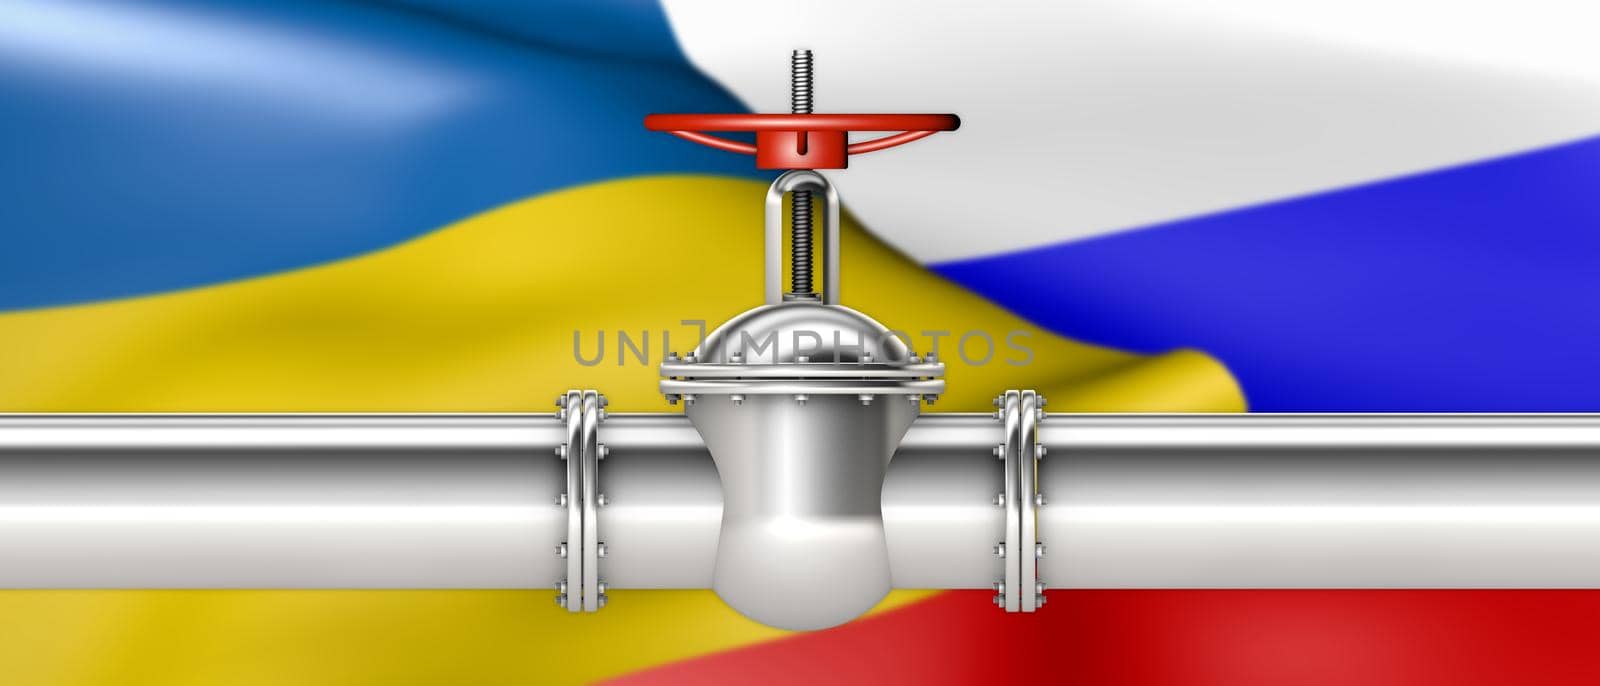 Glossy pipe and valve on a background of the flag of Ukraine and Russia